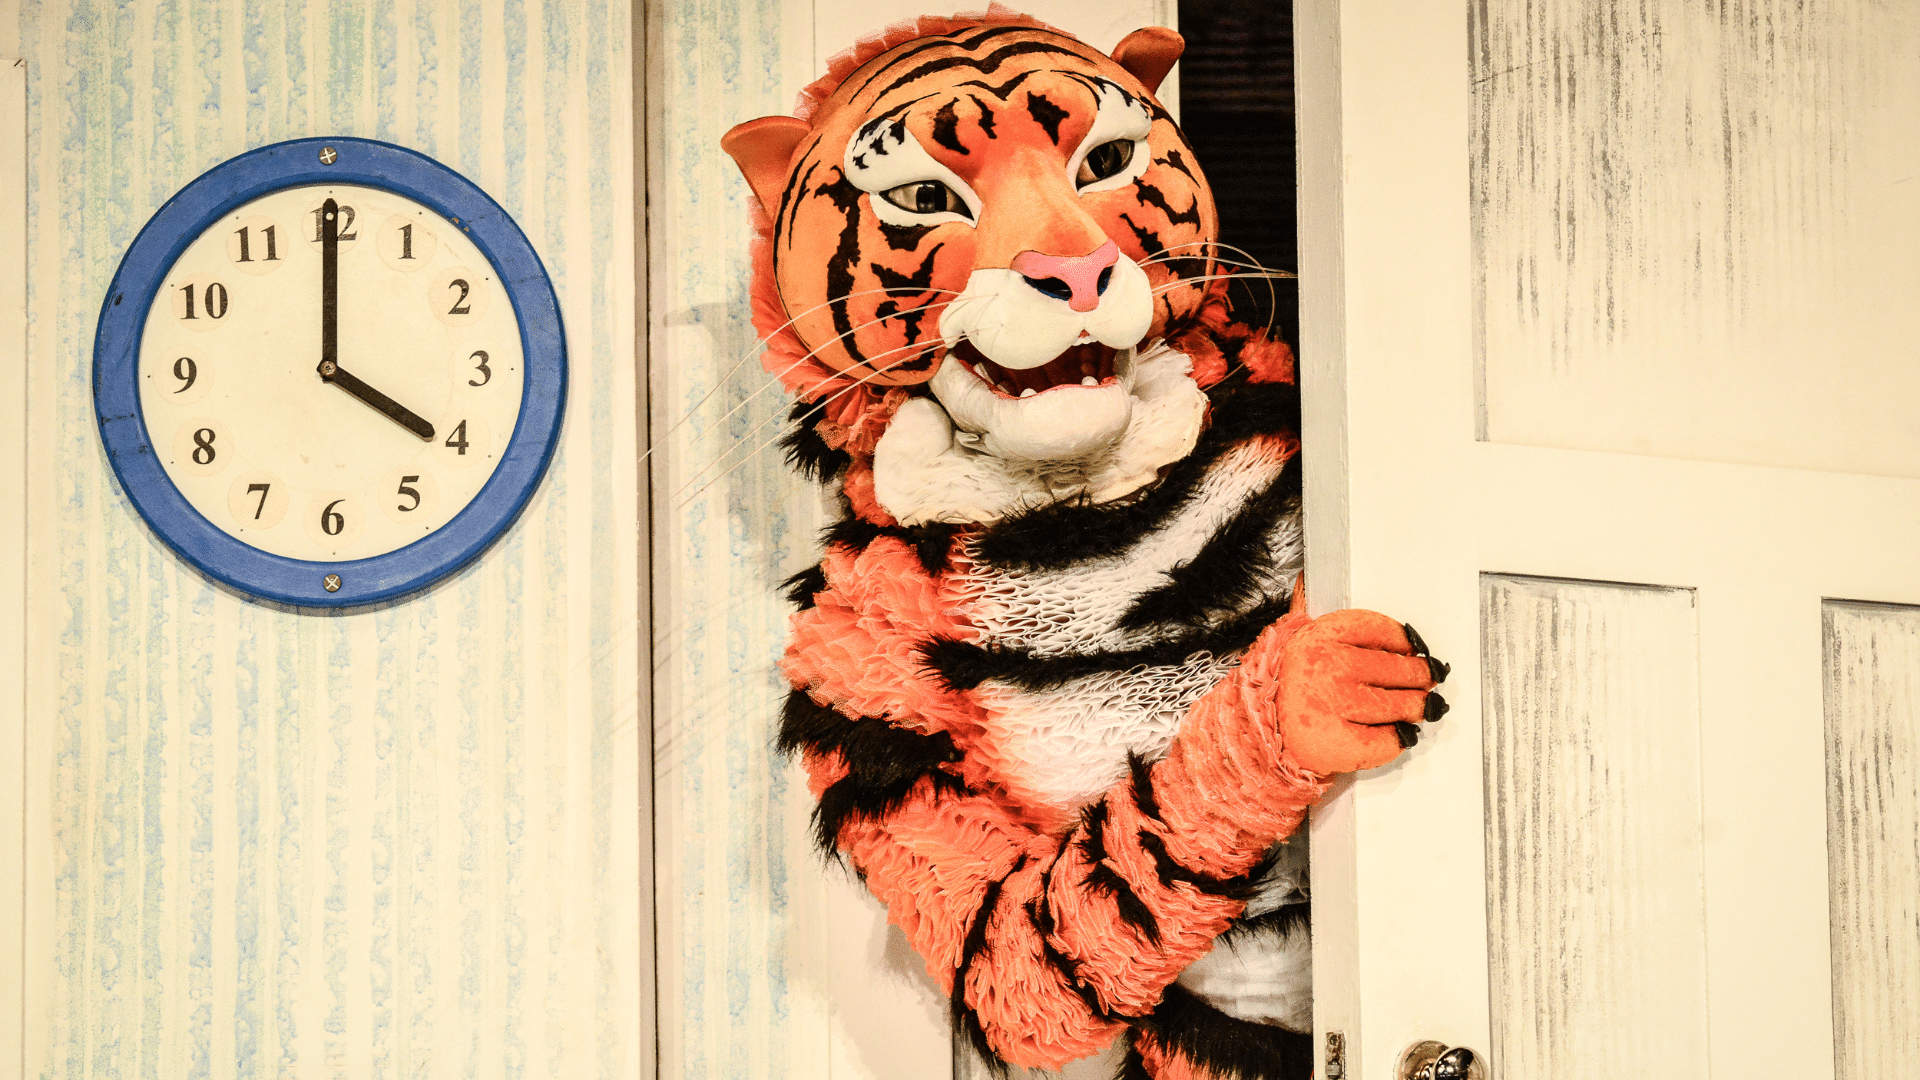 The Tiger Who Came to Tea production photo - An actor wearing a tiger costume peering around a white door. On the left is a clock with a blue edge on a white wall.